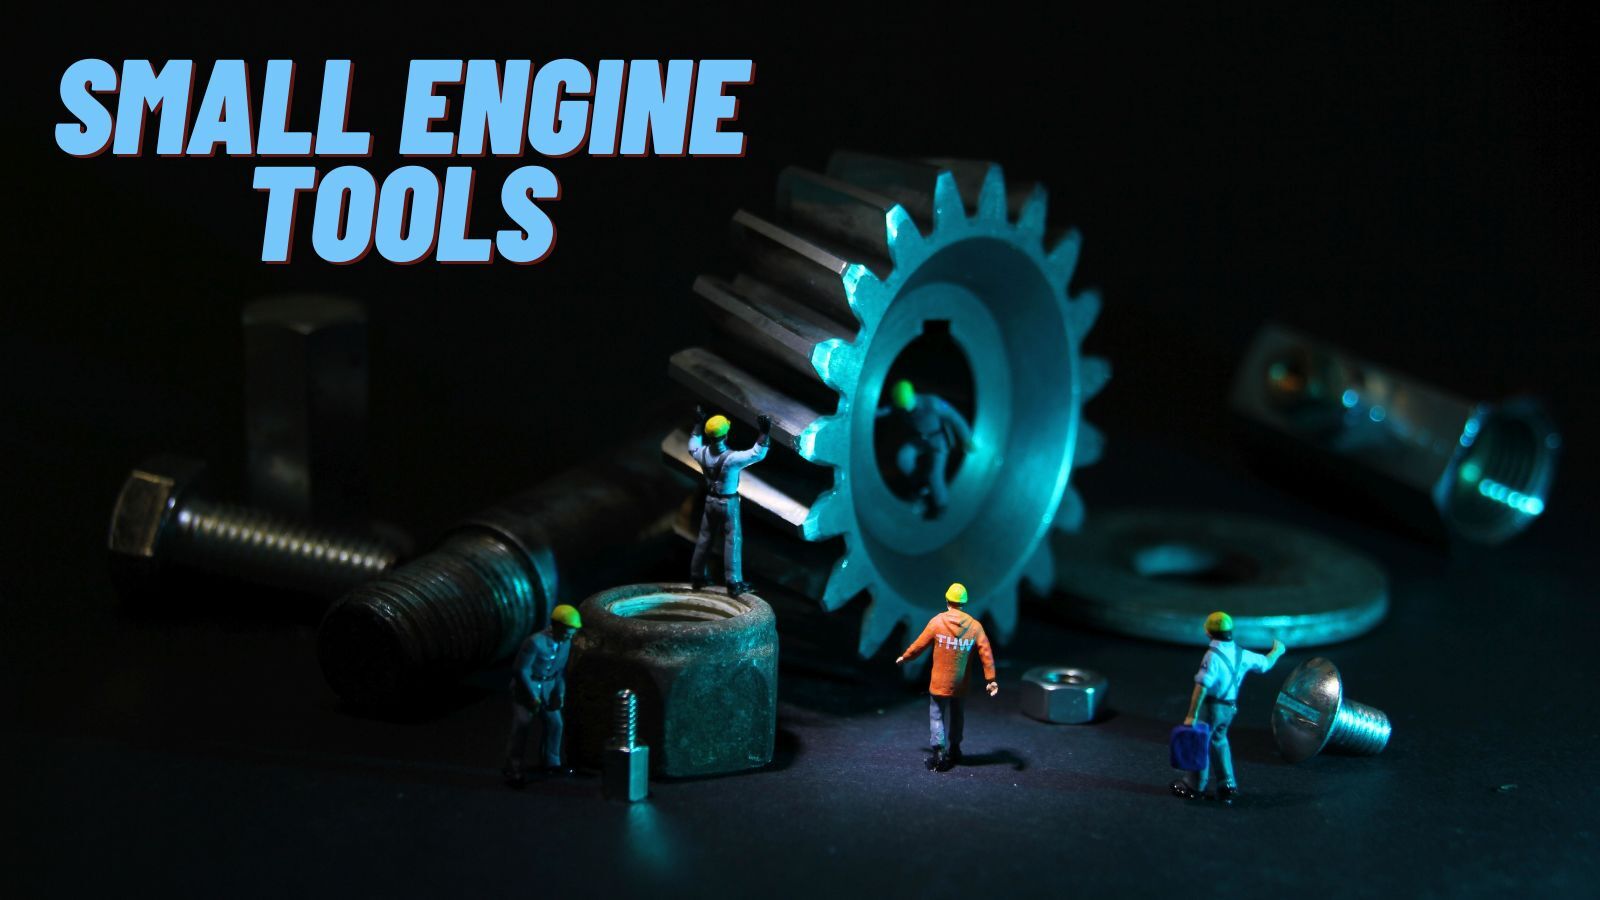 Top 11 Small Engine Tools to Extend the Life of Your Equipment!